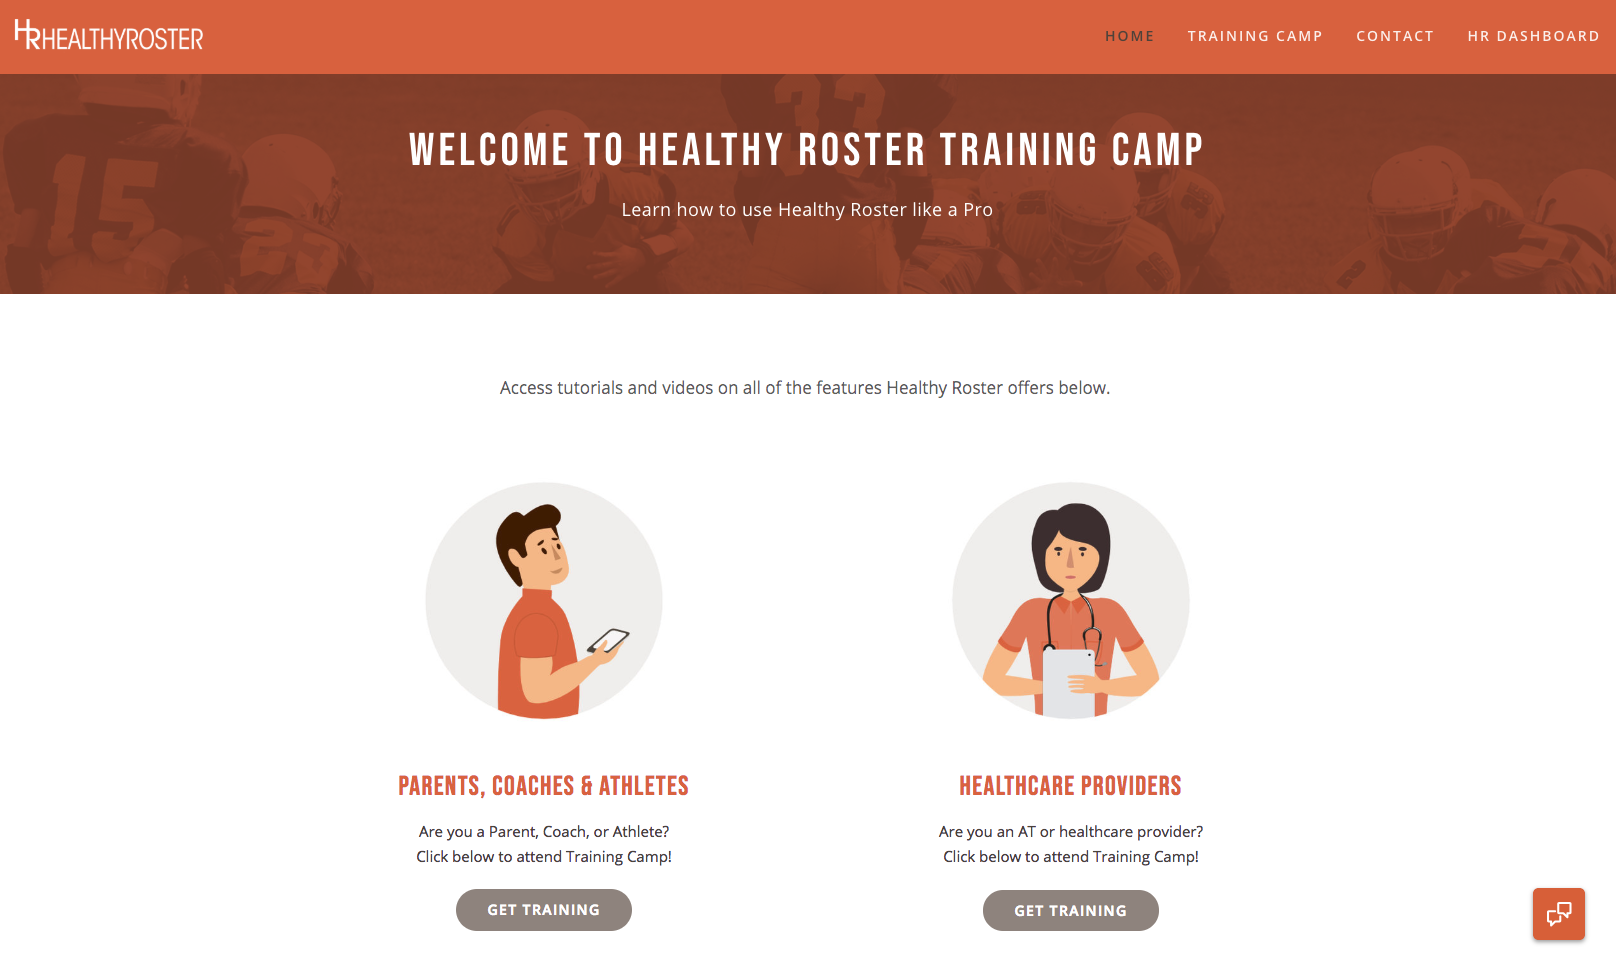  Healthy Roster Training Camp Home Page 